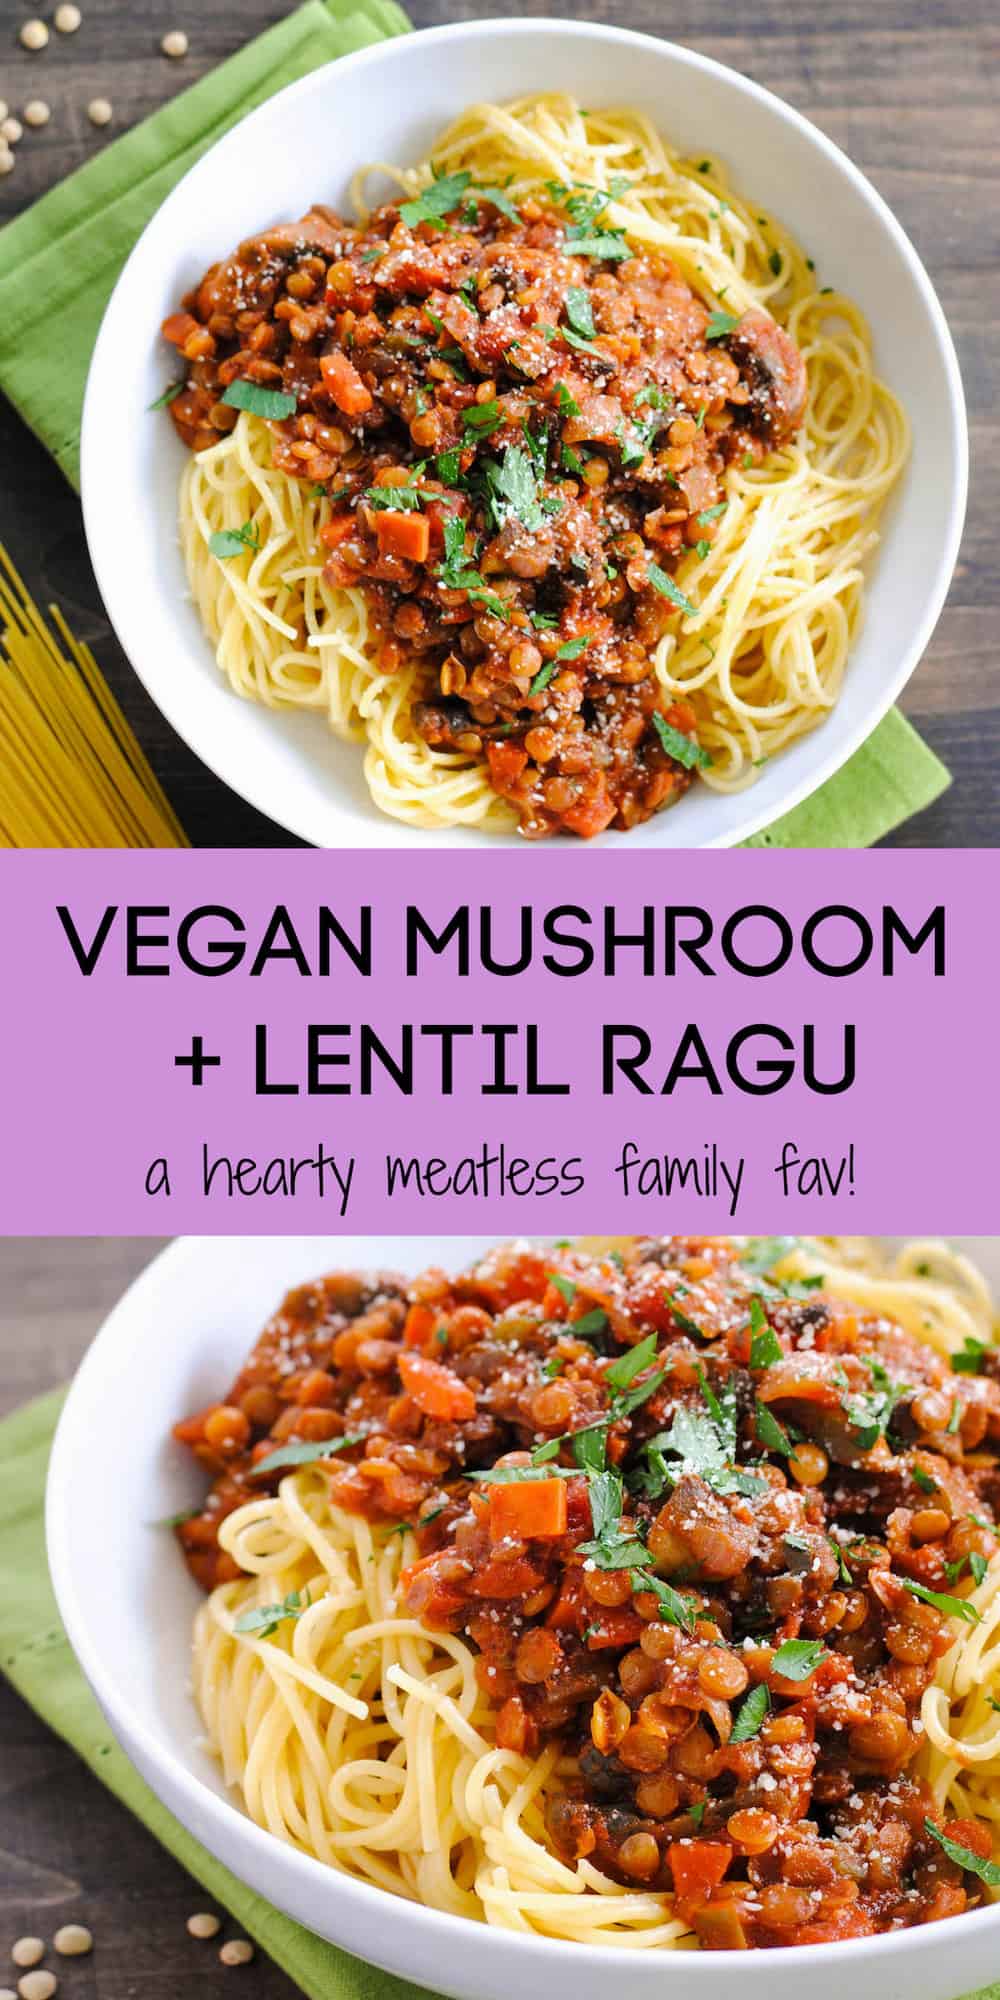 Collage of images of bowl of pasta and sauce with overlay: VEGAN MUSHROOM + LENTIL RAGU a hearty meatless family fav!